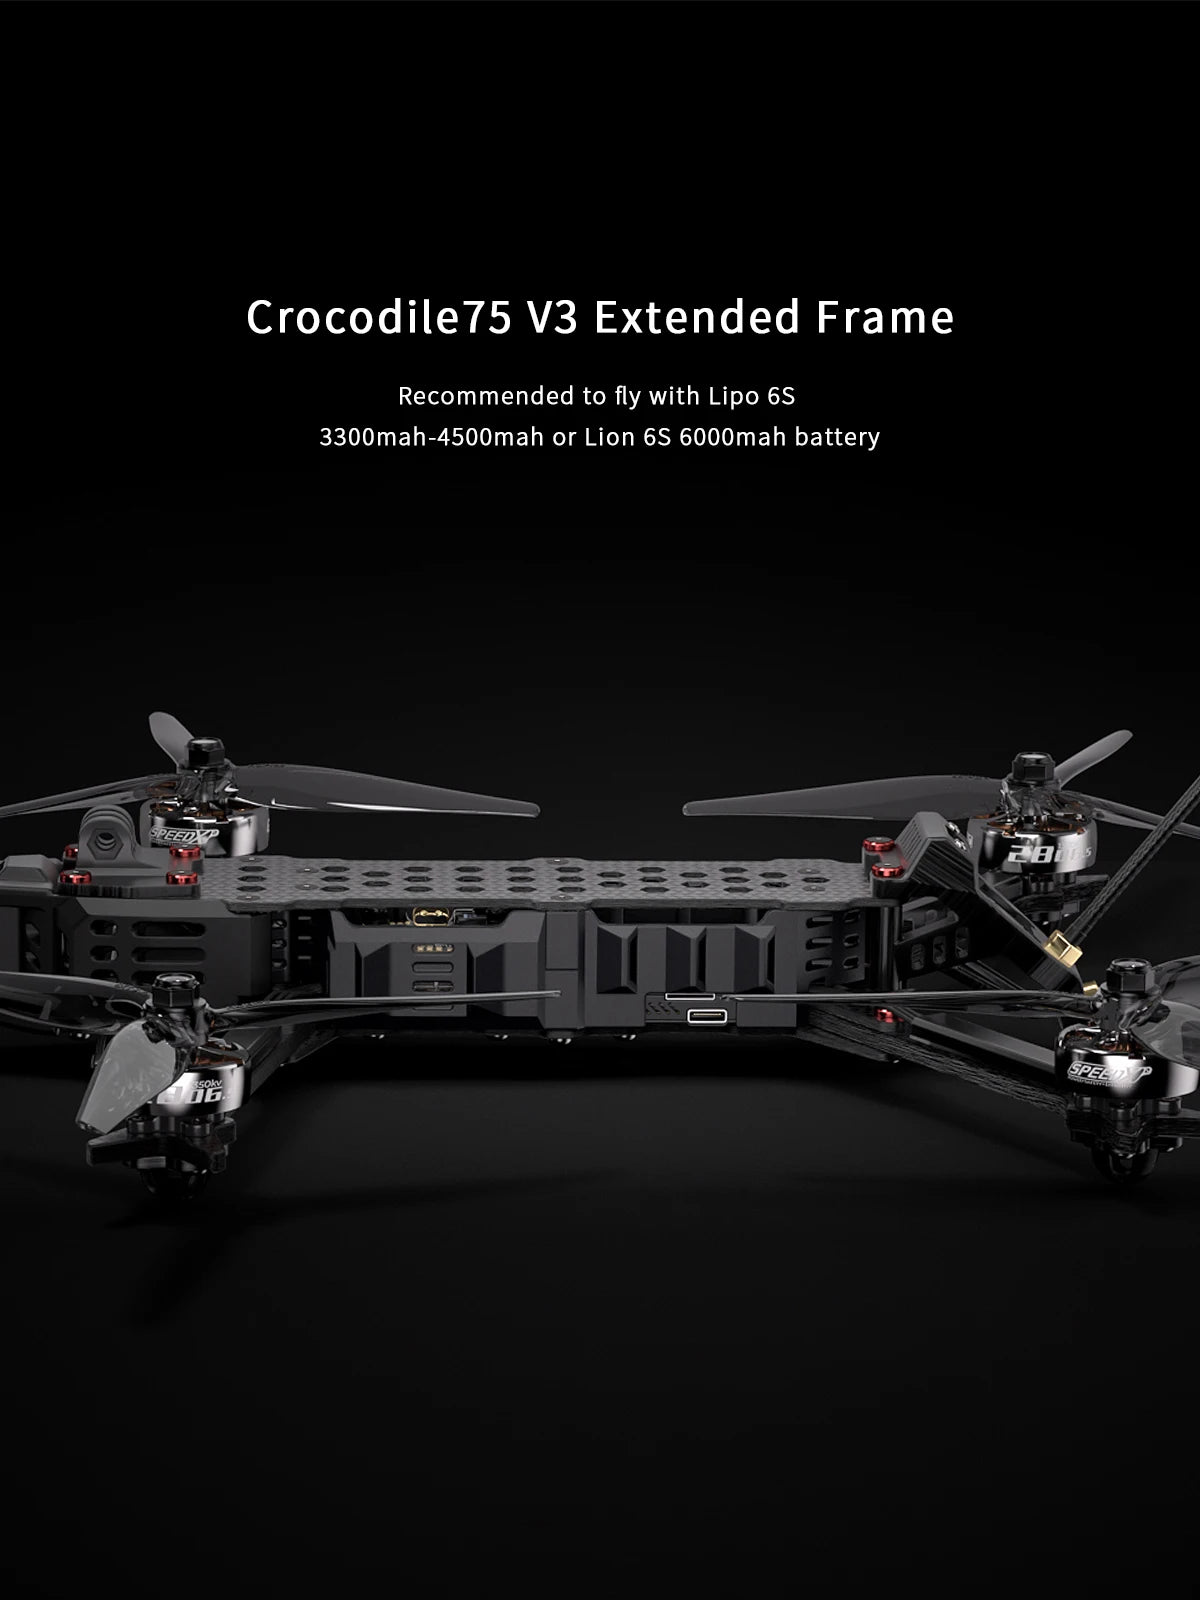 GEPRC 7.5inch Crocodile75 V3 HD, Crocodile75 V3 Extended Frame Recommended to fly with Lipo 6S 3300